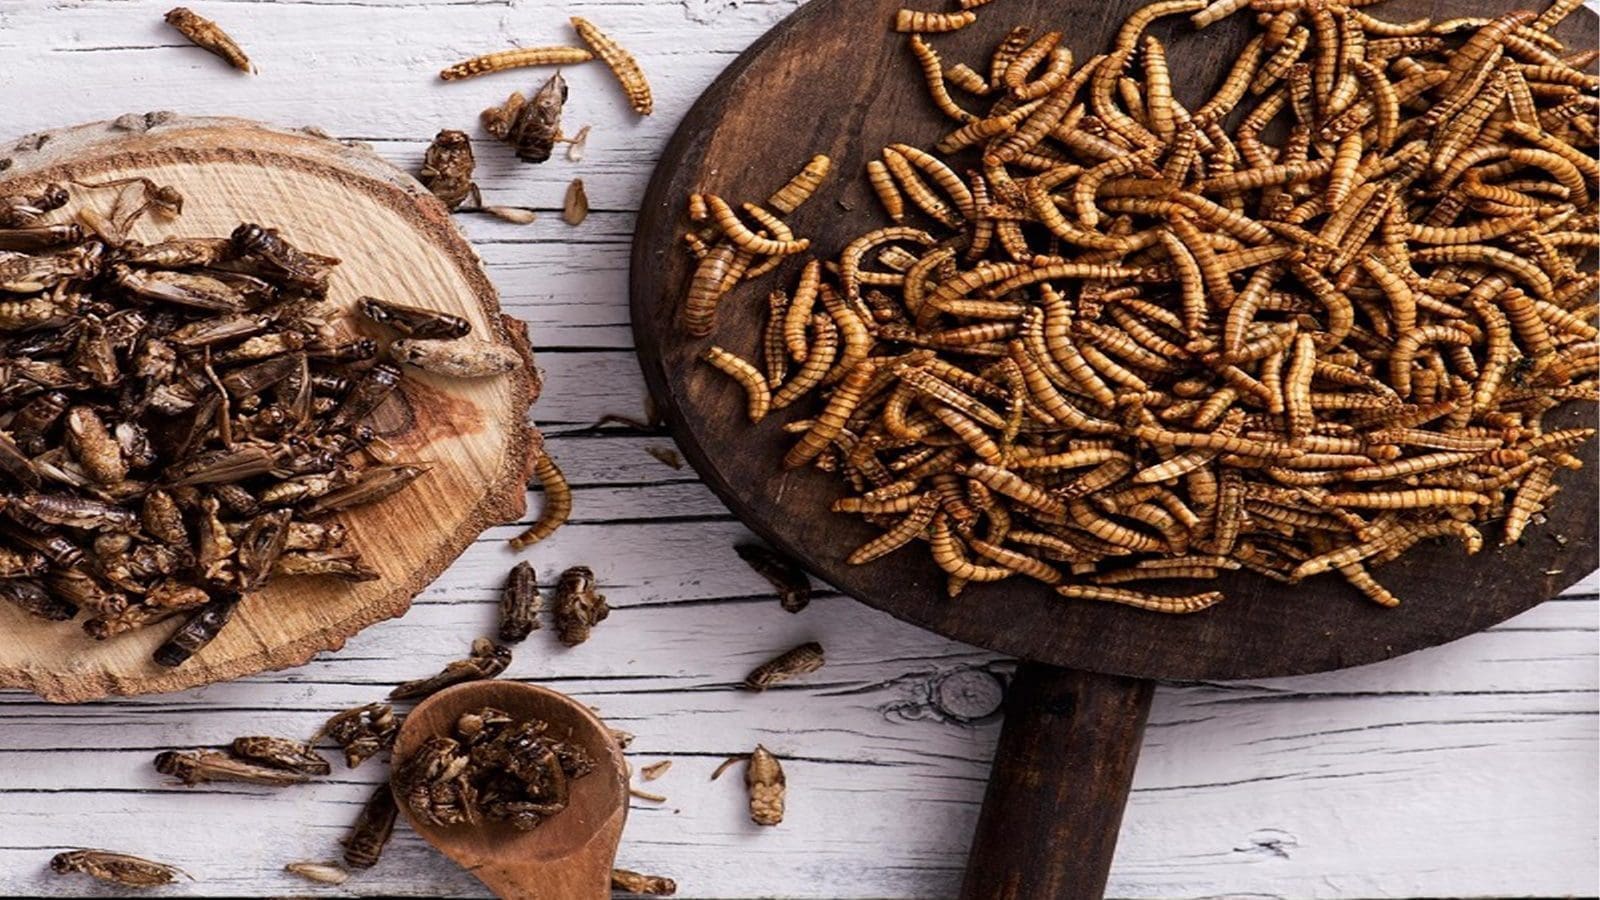 Great Britain implements strict regulations on edible insects, only three species authorized for market sale